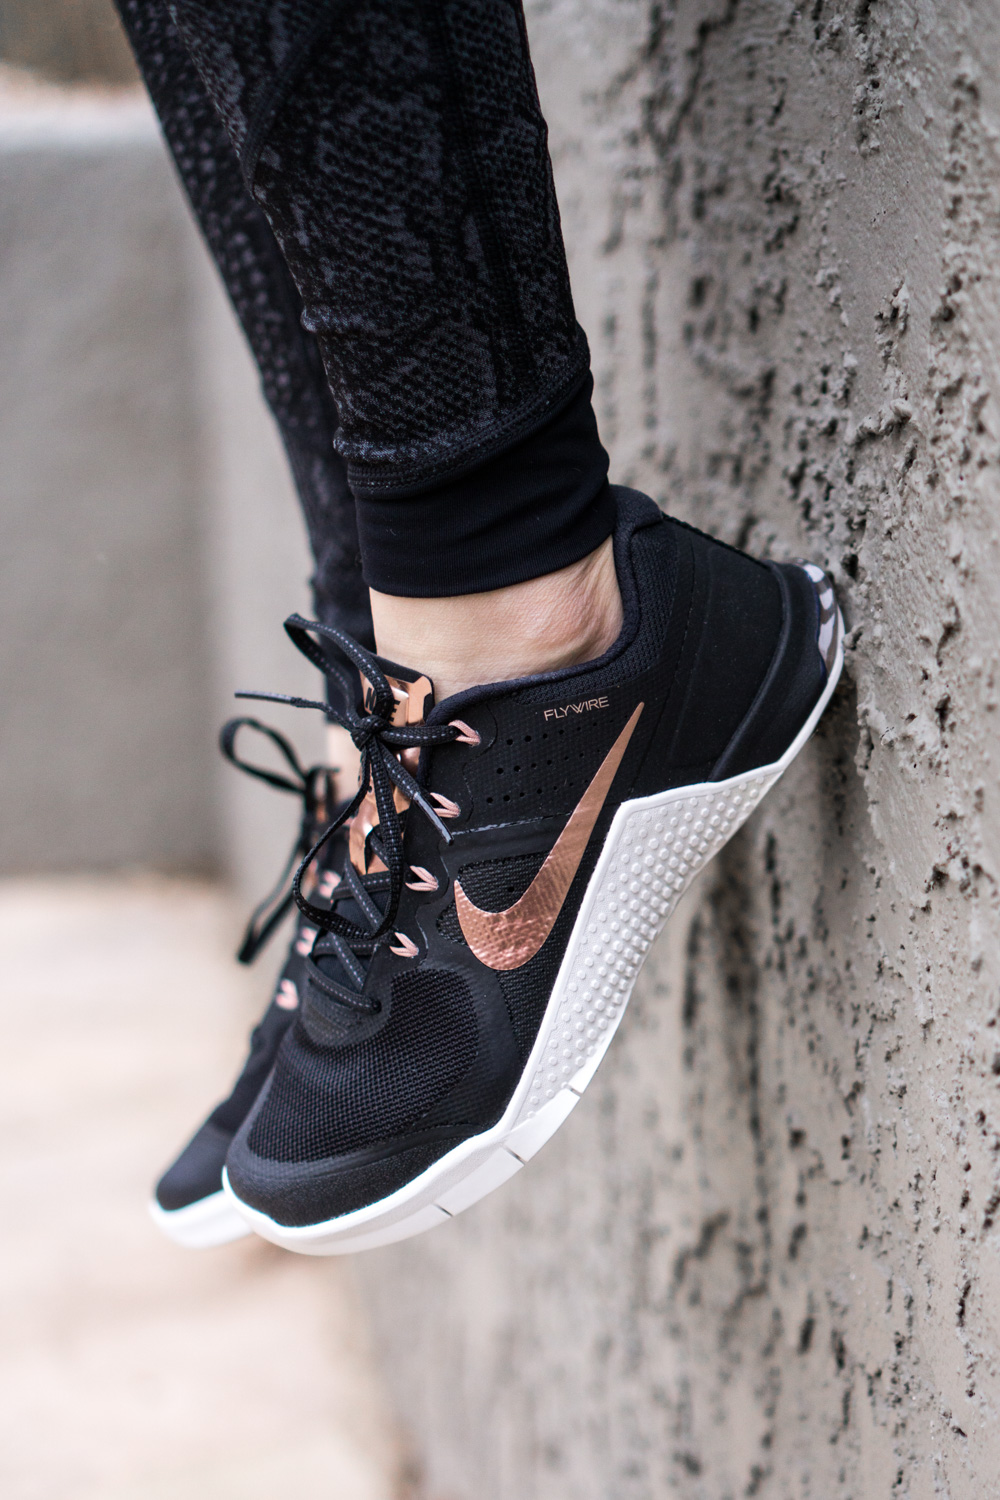 Gold Nike Metcons - Agent Athletica